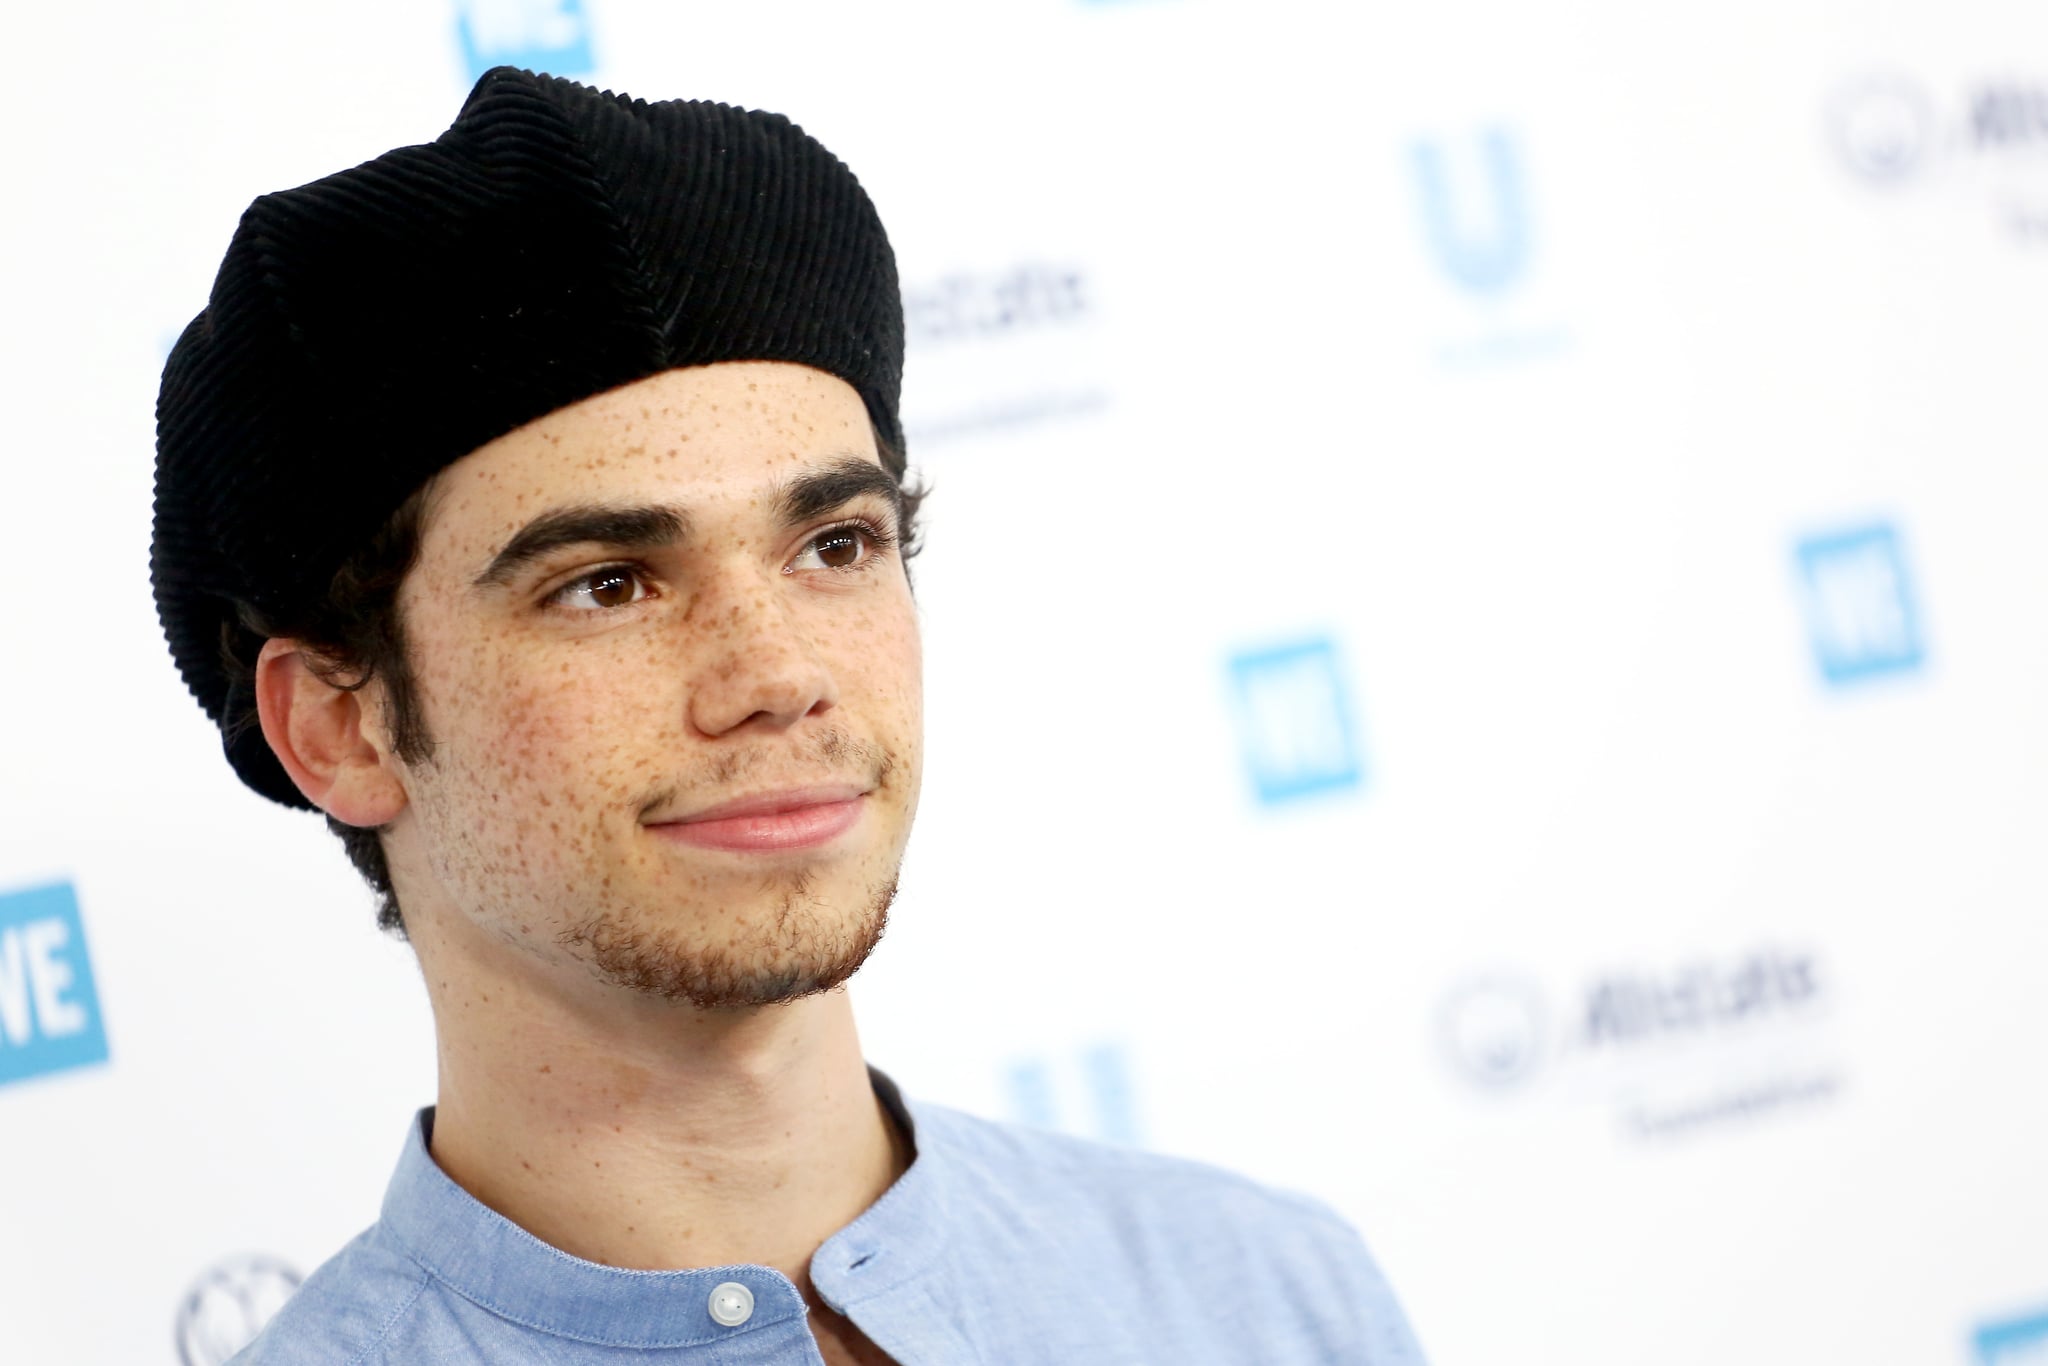 INGLEWOOD, CALIFORNIA - APRIL 25: Cameron Boyce attends WE Day California at The Forum on April 25, 2019 in Inglewood, California. (Photo by Tommaso Boddi/Getty Images for WE Day)